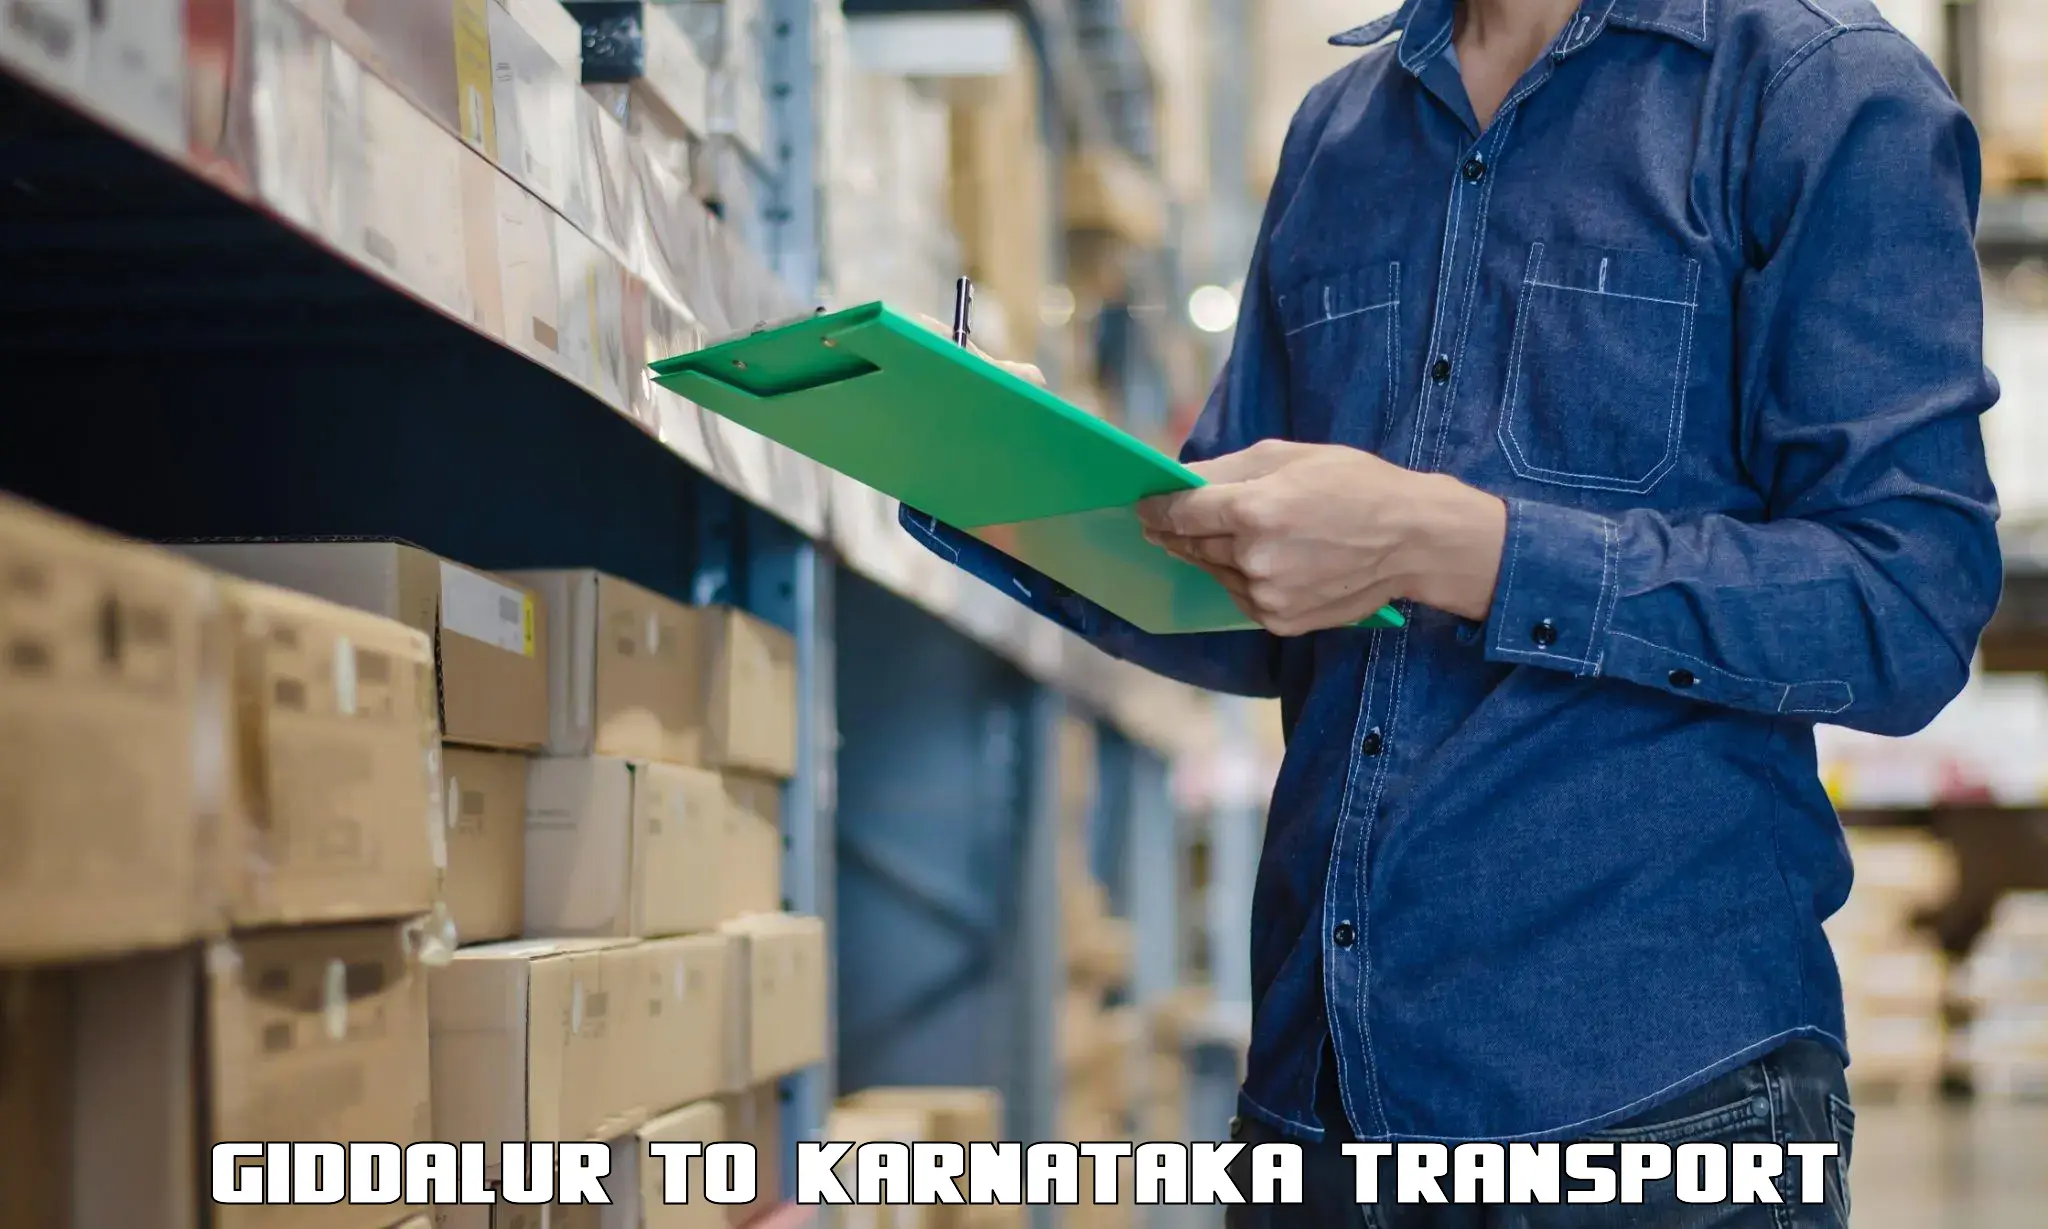 Package delivery services Giddalur to Mannaekhelli